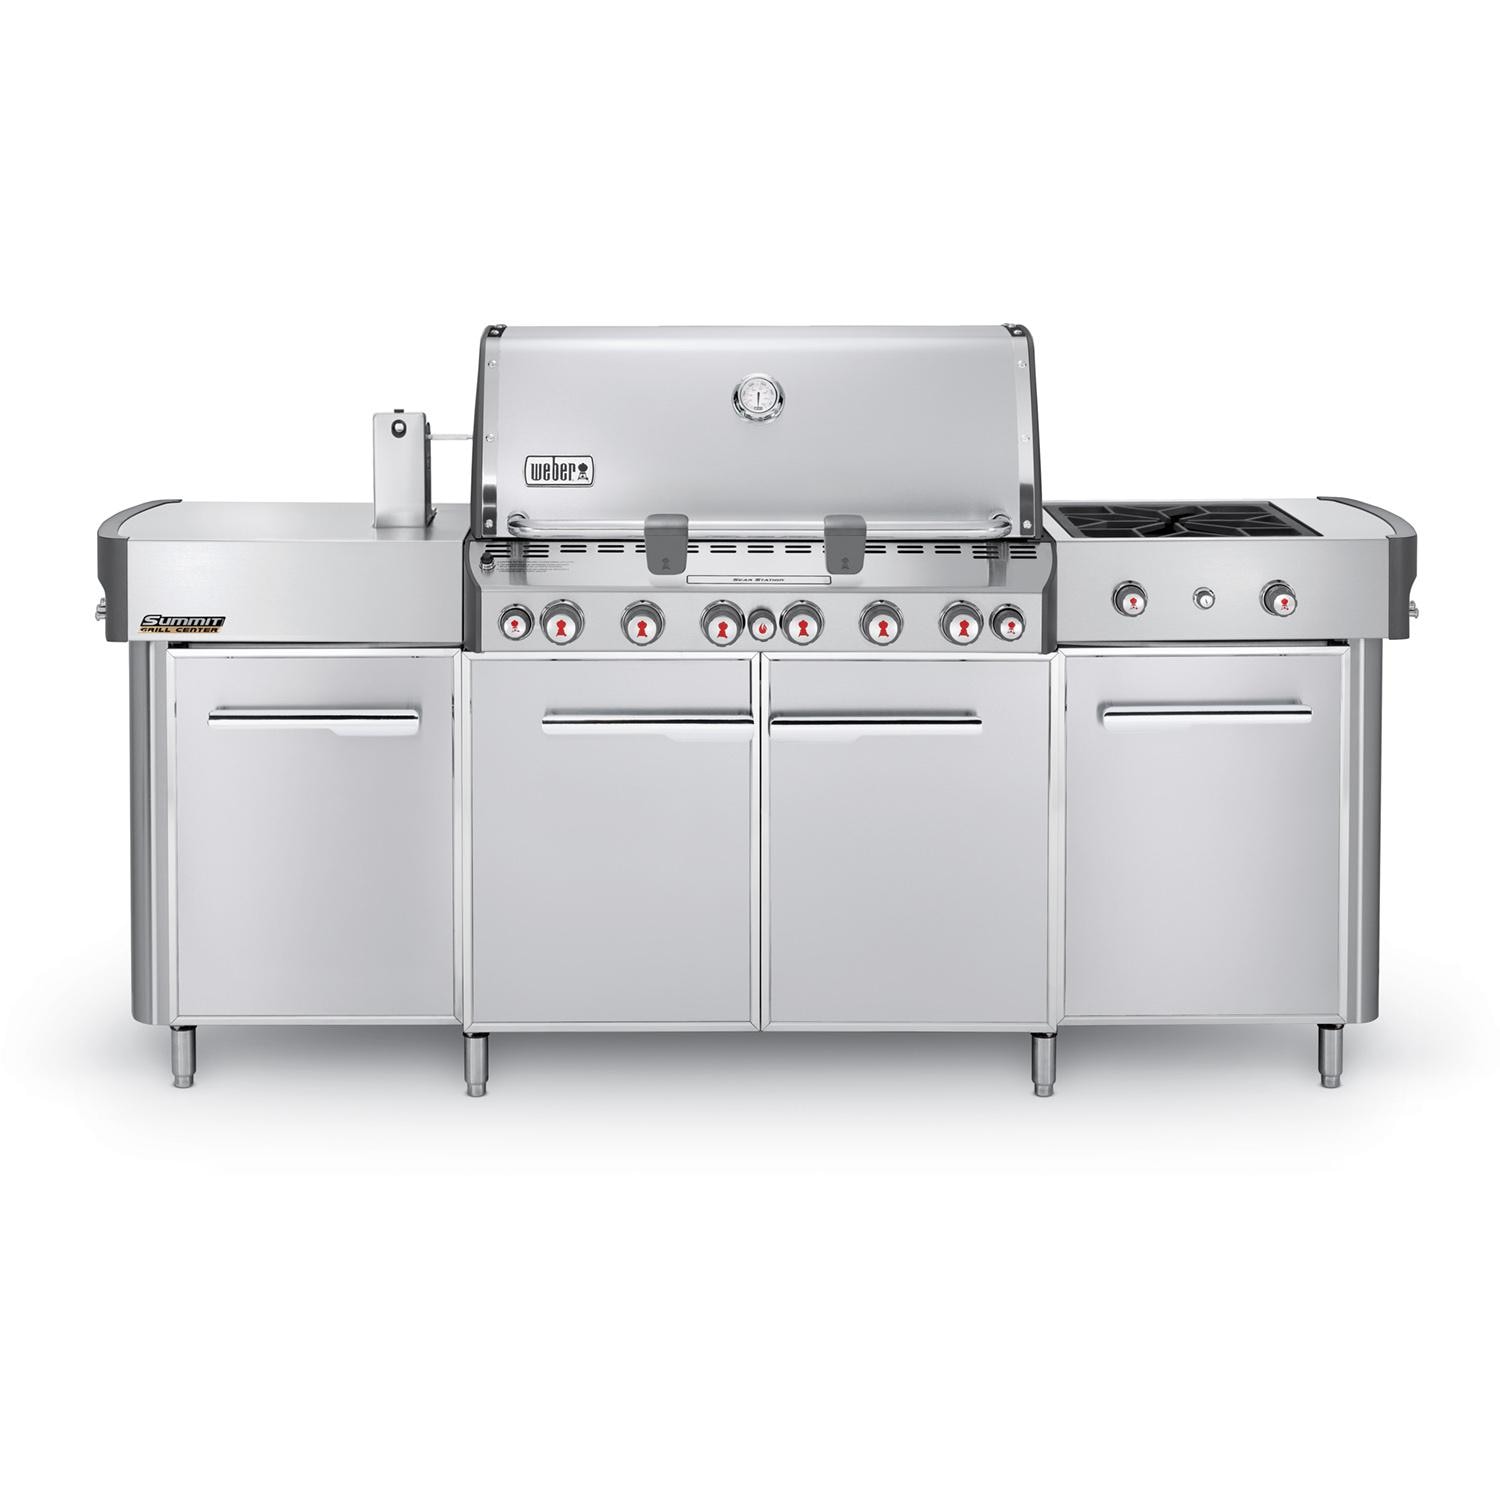 Weber Summit Grill Center Freestanding Natural Gas Grill With Rotisserie, Sear Burner & Side Burner - image 1 of 6